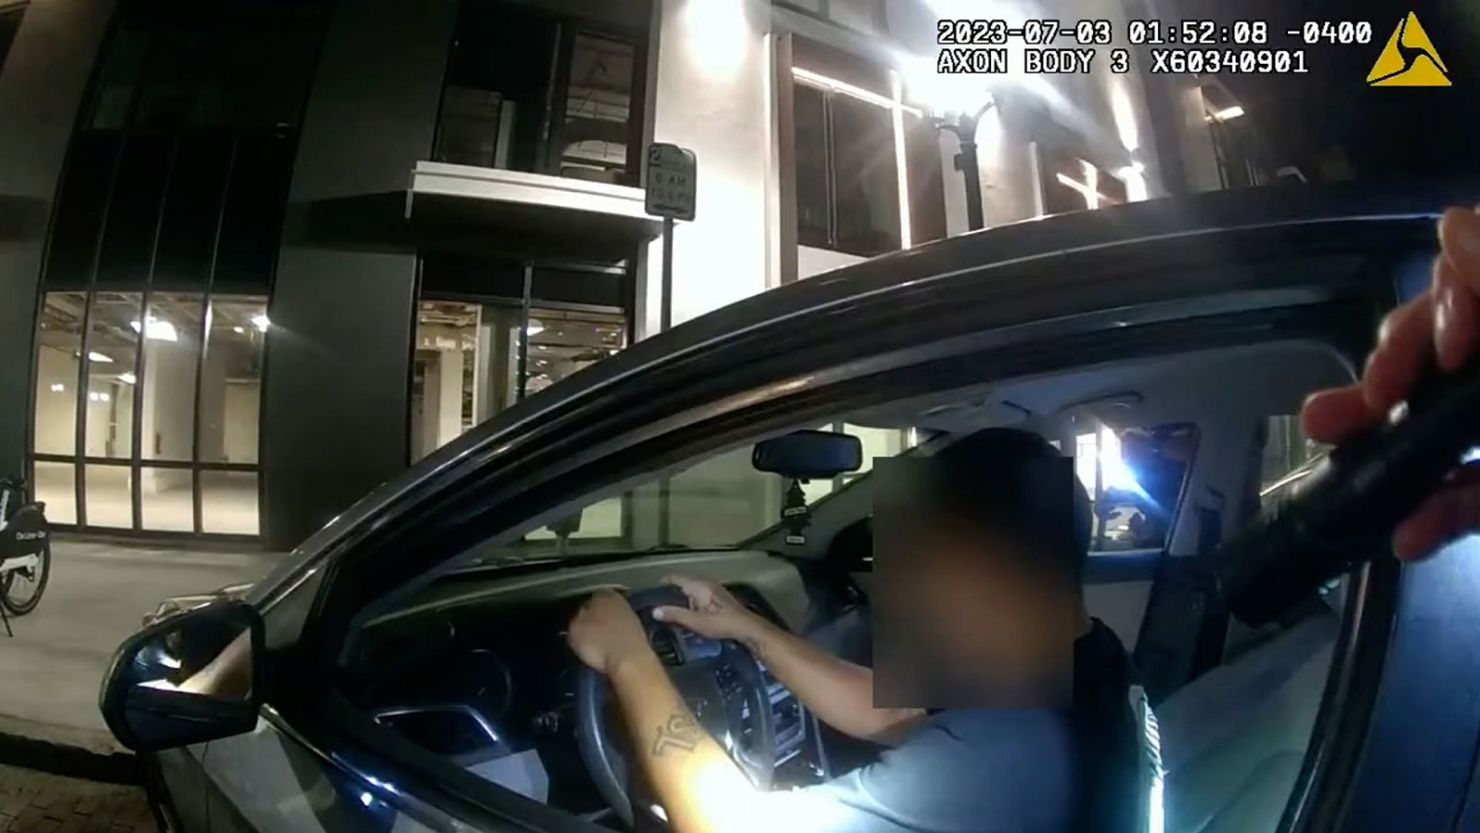 In body camera footage released by Orlando Police Wednesday, Diaz is seen sitting in his parked car when he is approached by several police officers. At one poine, Diaz reaches his right hand toward the vehicle's center console before an officer fires what sounds like a single gunshot. Less than a minute elapses in the encounter before the officer shoots Diaz.